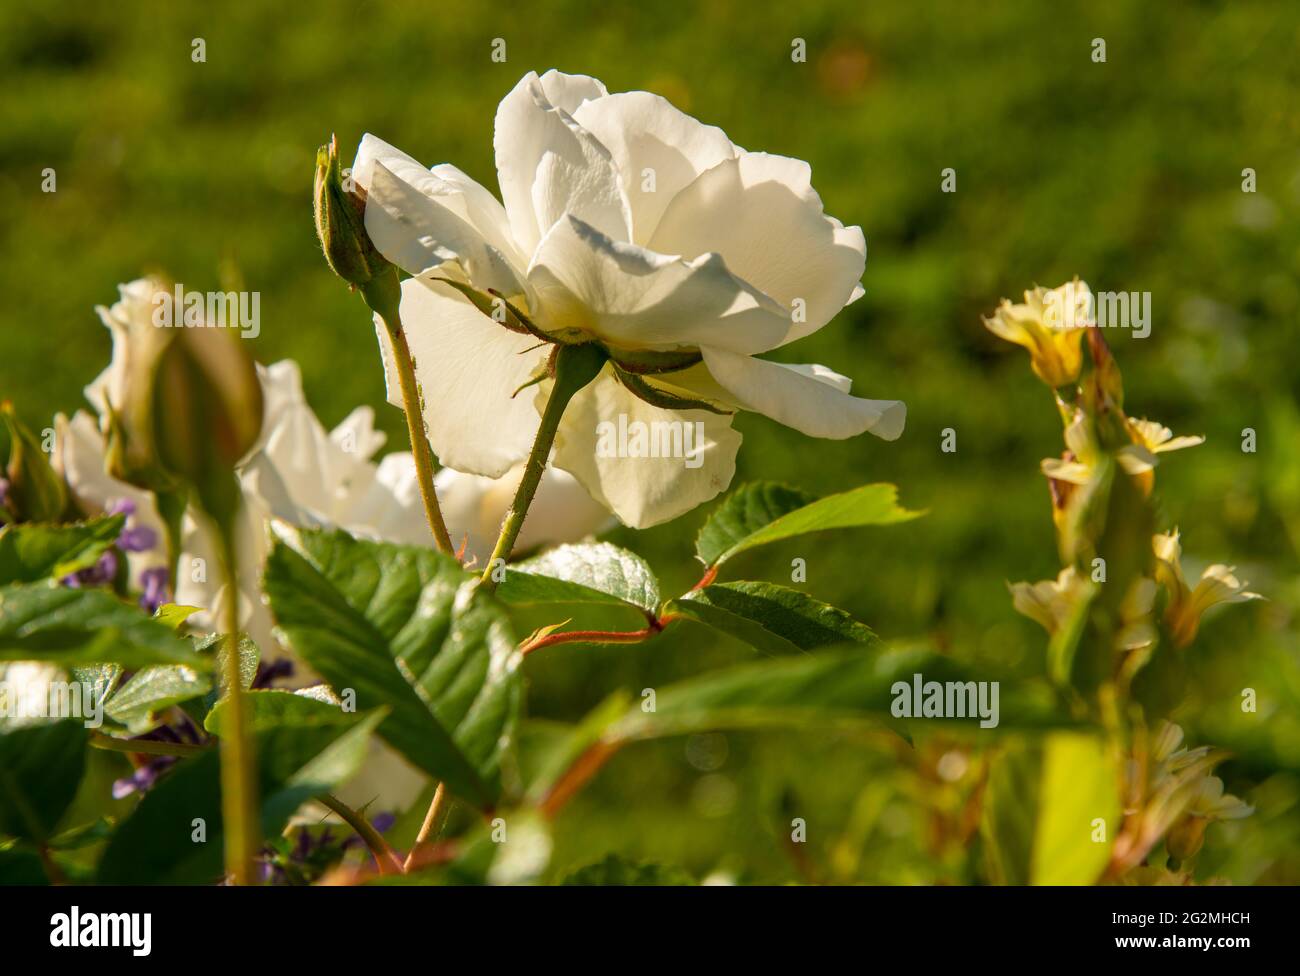 Flowering white rose blooming in a summer garden Stock Photo